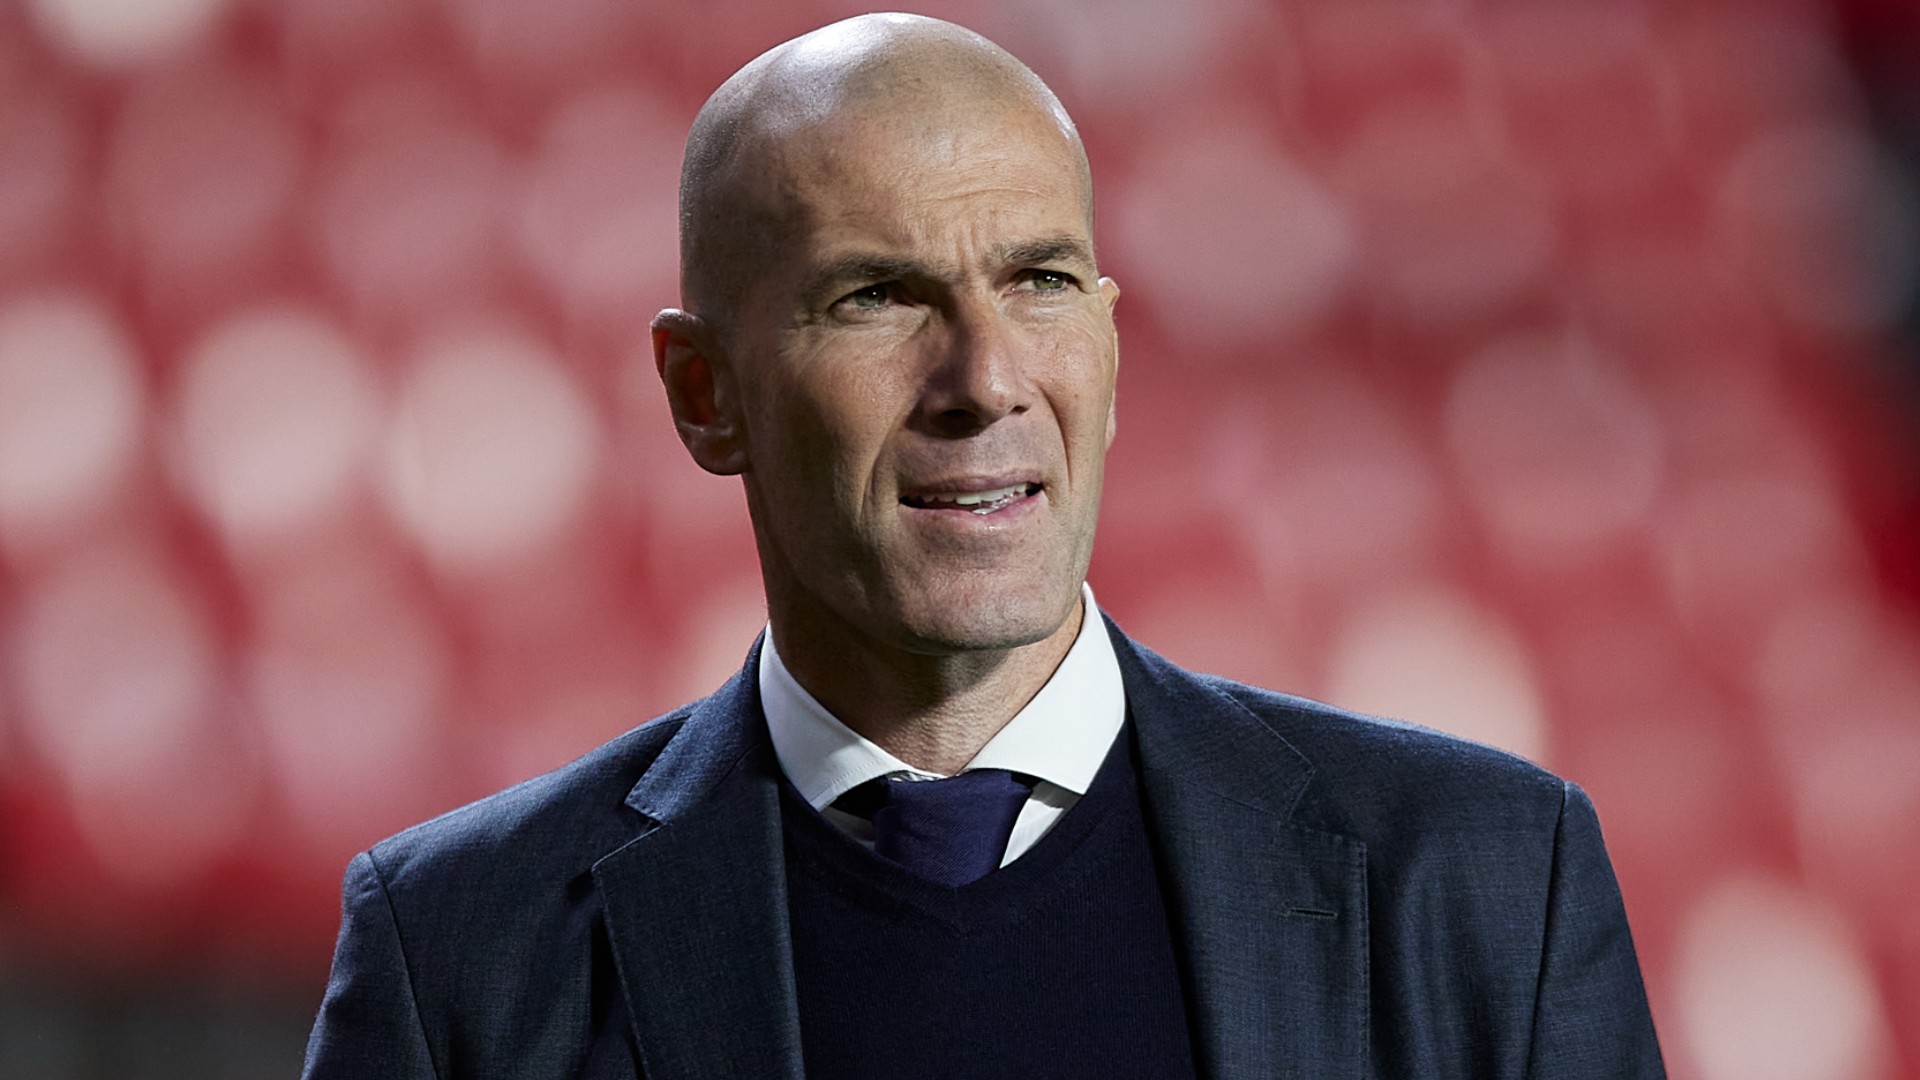 Zidane-cropped (Getty Images)